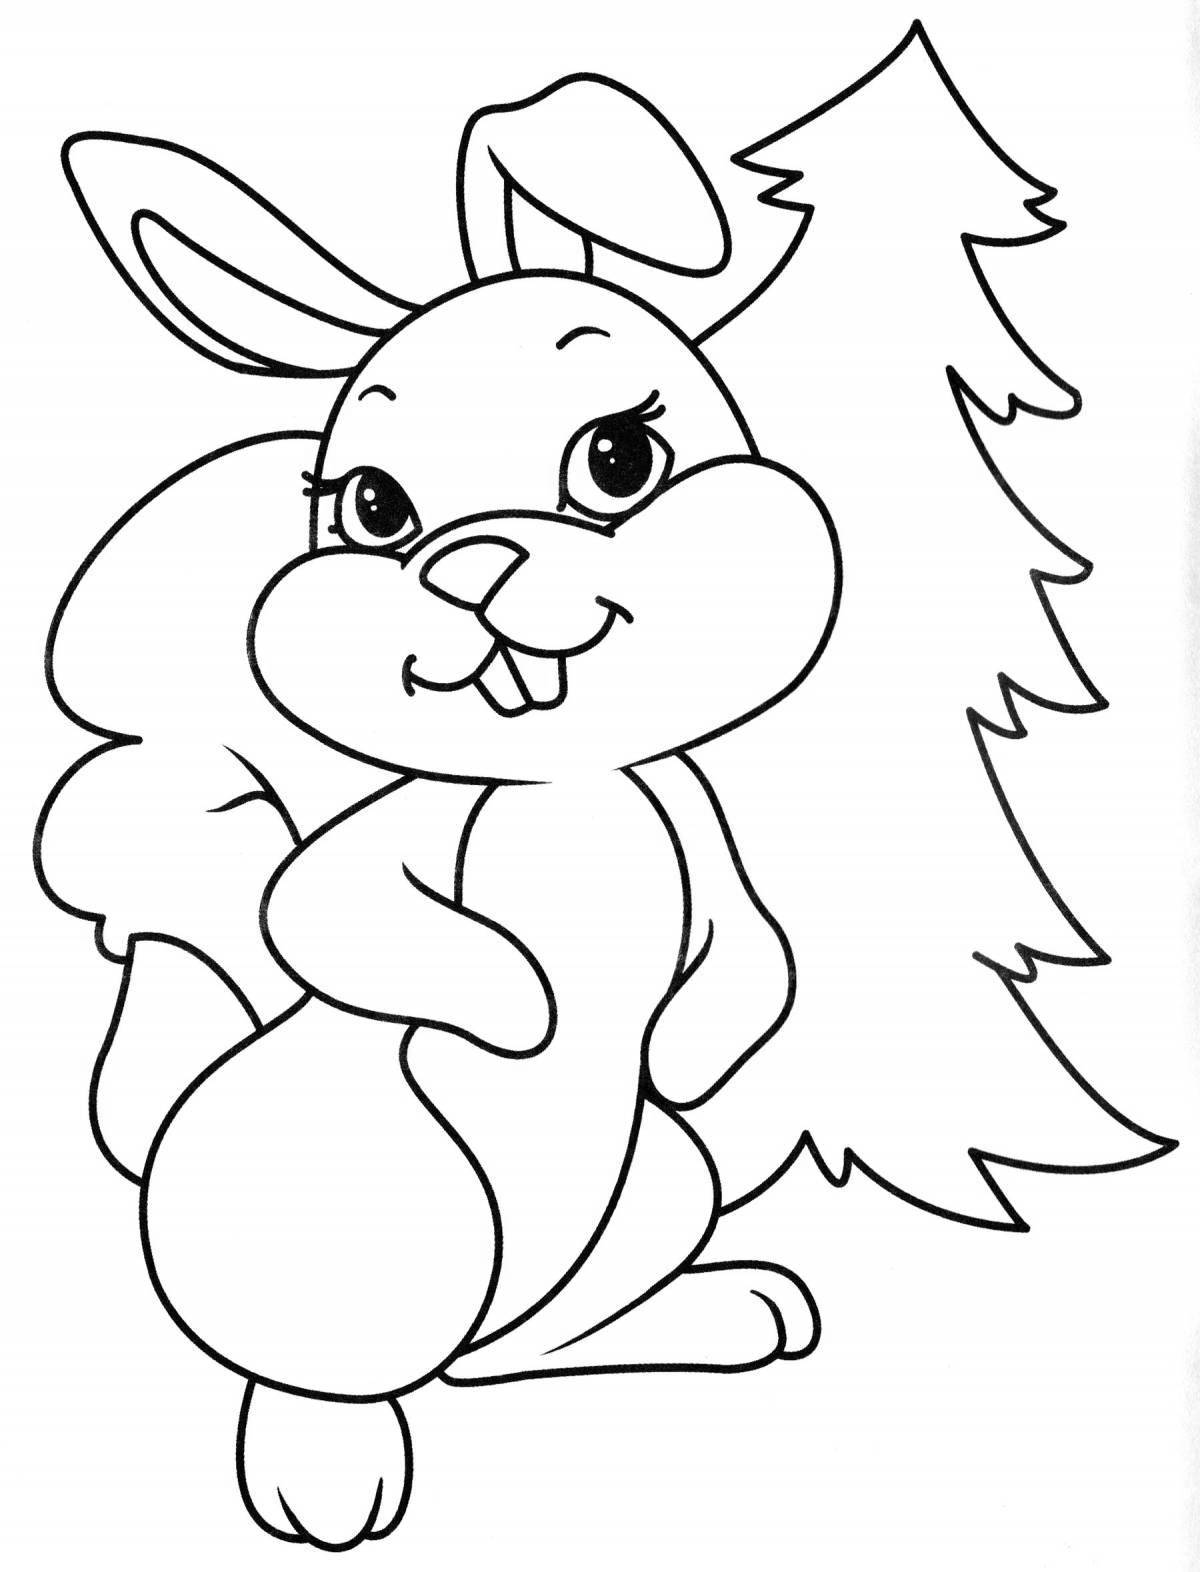 Coloring book funny hare and squirrel